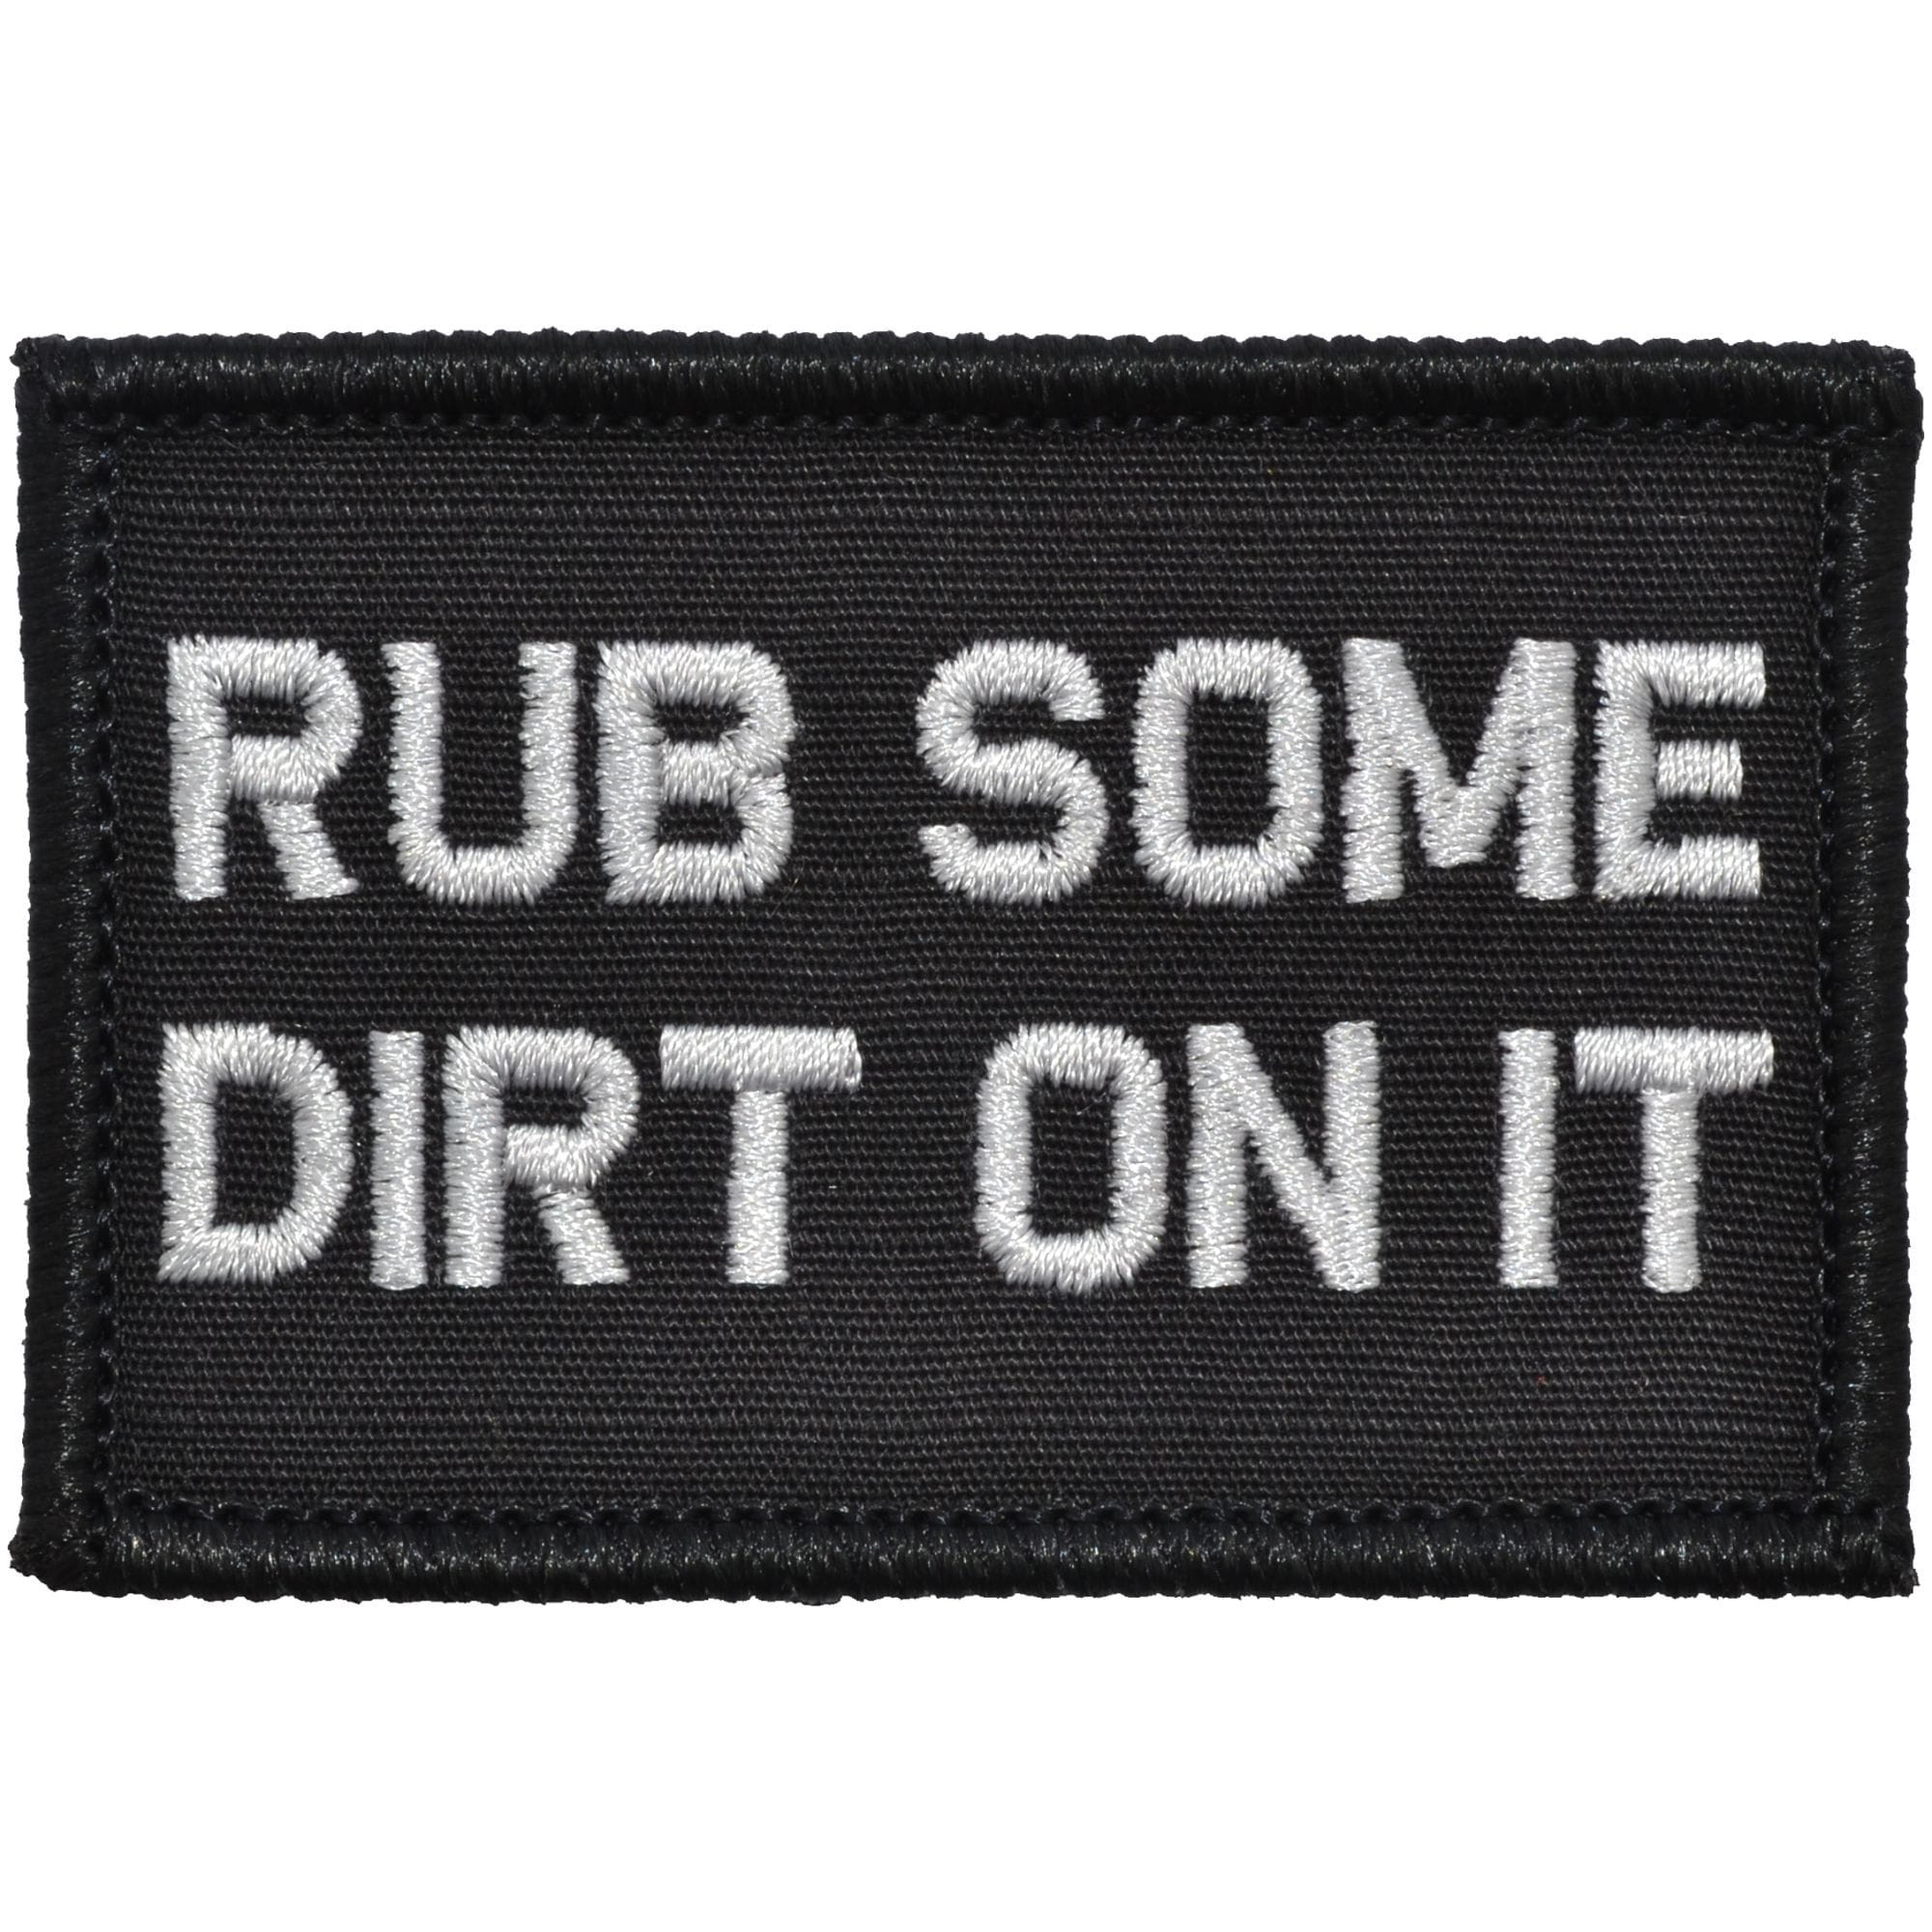 Tactical Gear Junkie Patches Black Rub Some Dirt On It - 2x3 Patch